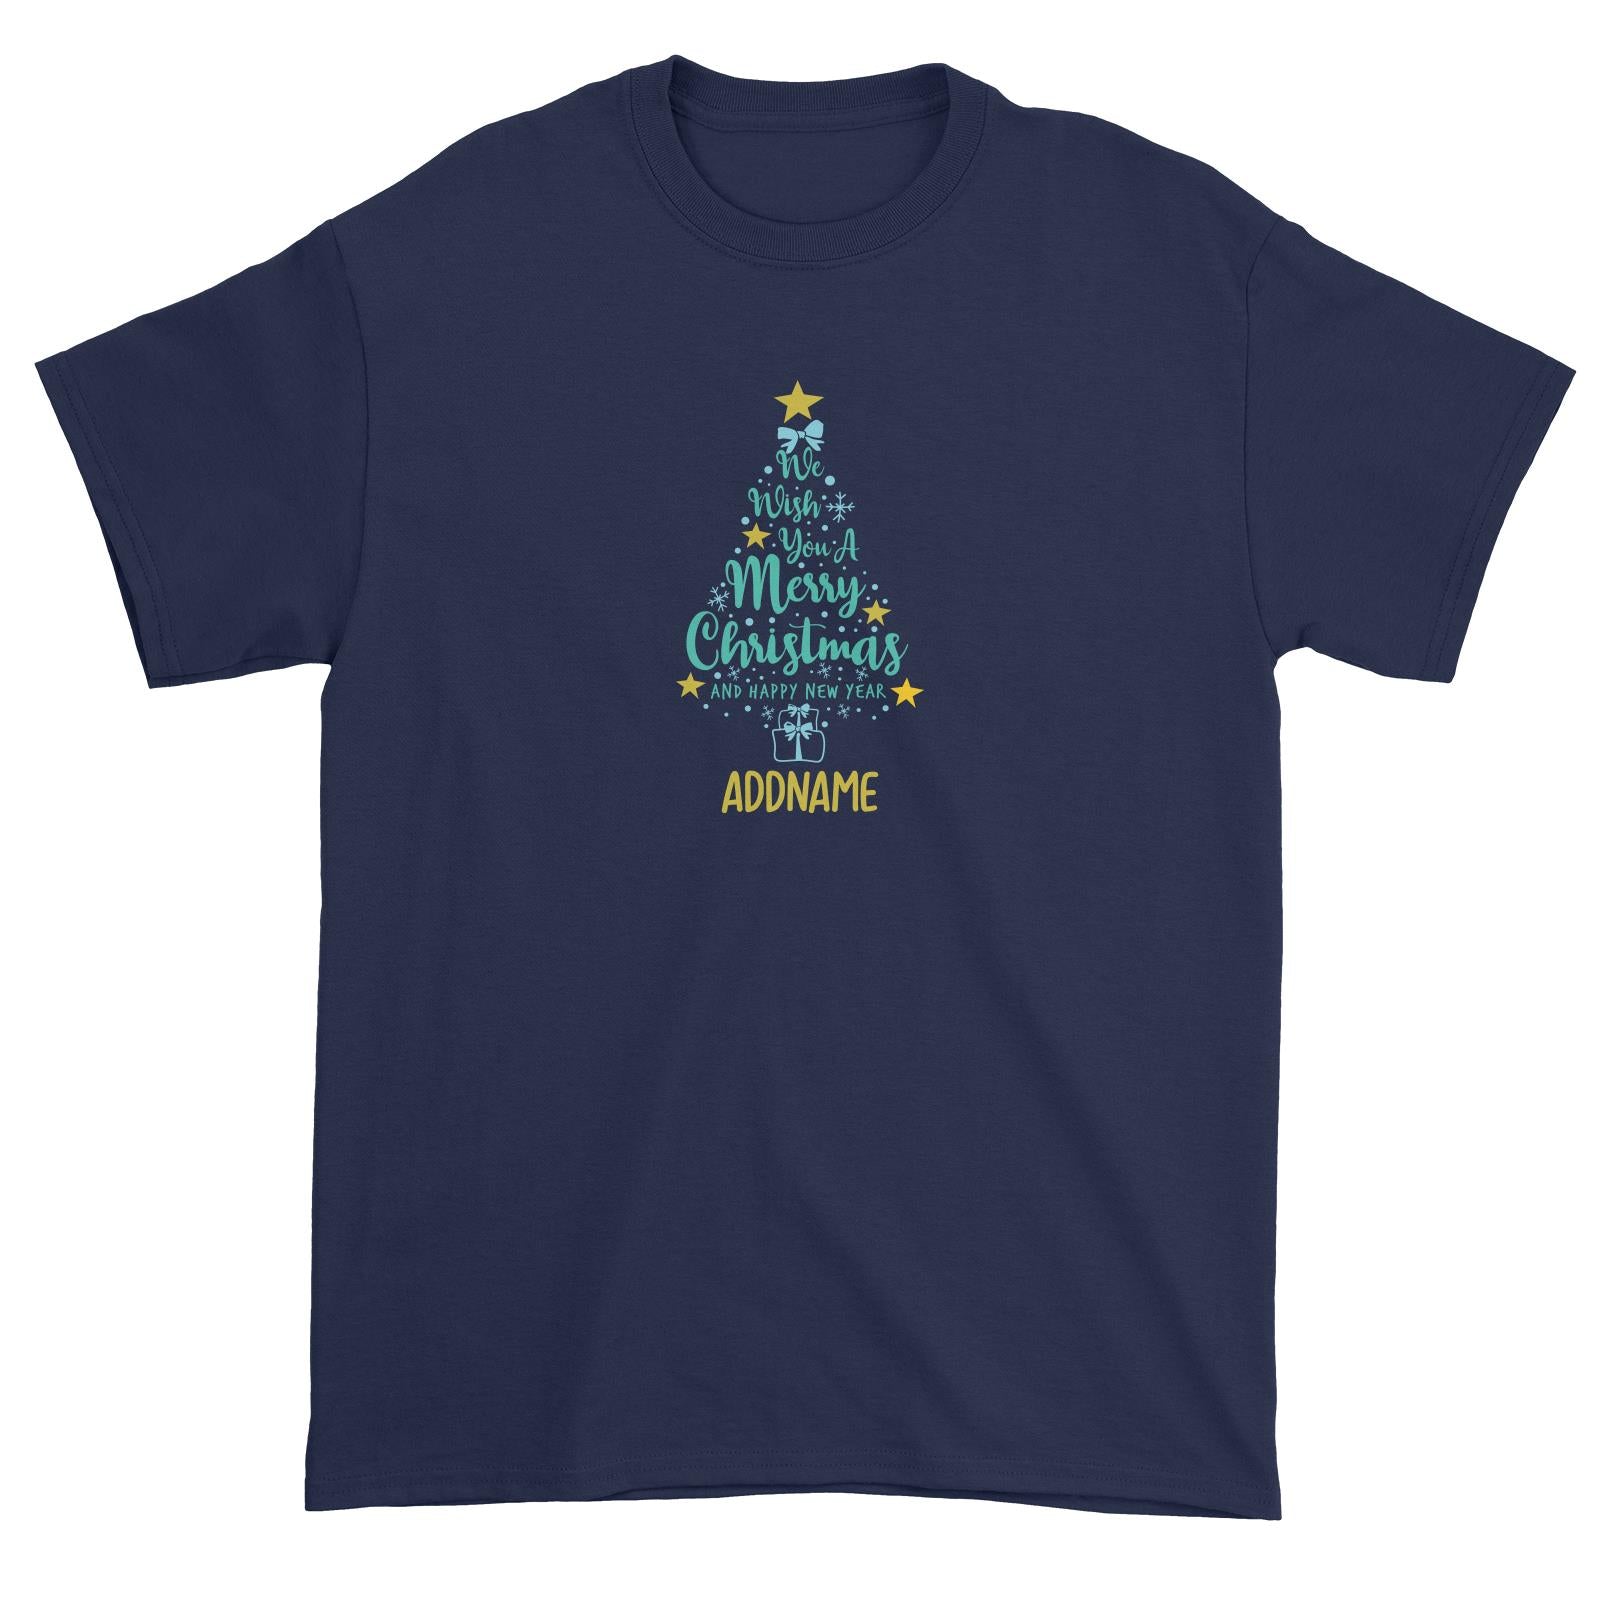 Xmas We Wish You A Merry Christmas and A Happy New Year Unisex T-Shirt